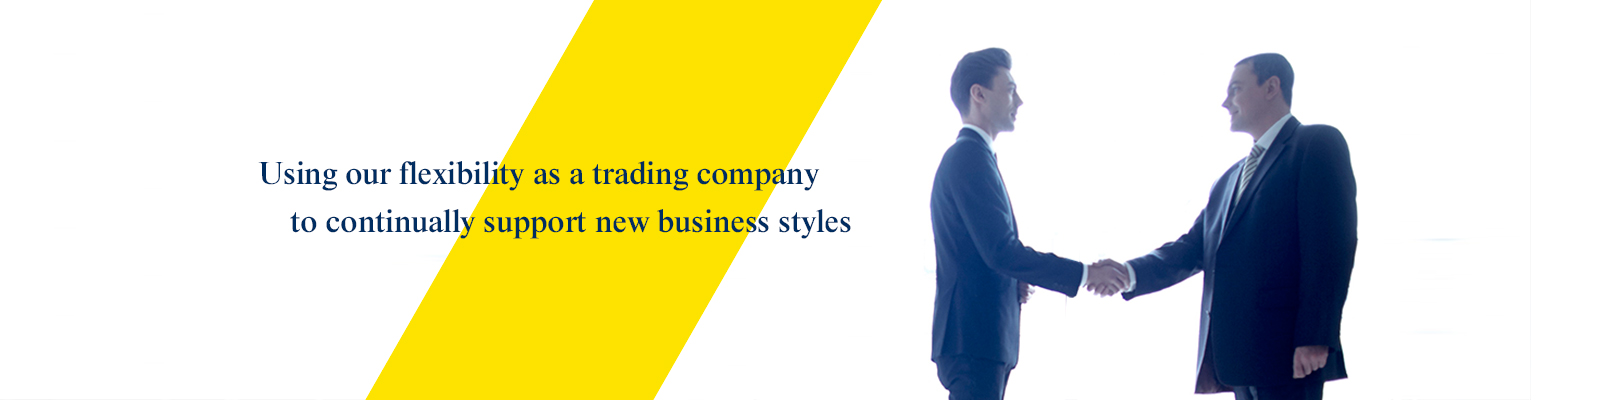 Using our flexibility as a trading company to continually support new business styles